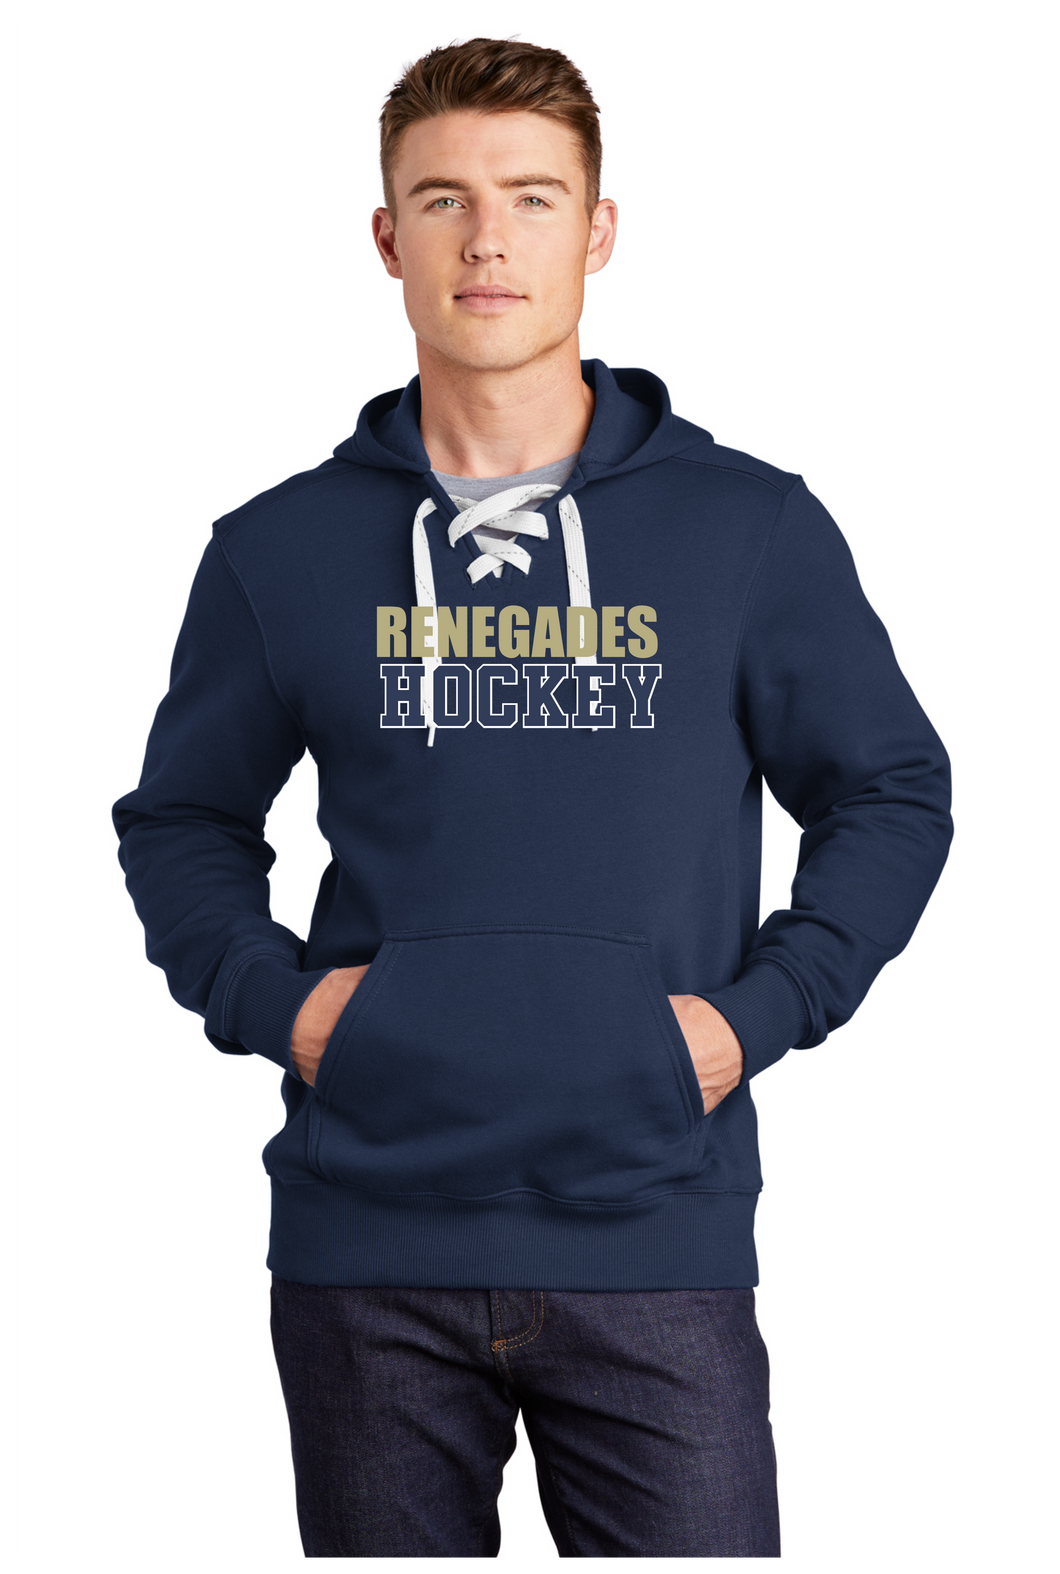 Renegades  Hockey  Hoodie with laces- 3 color Print design.